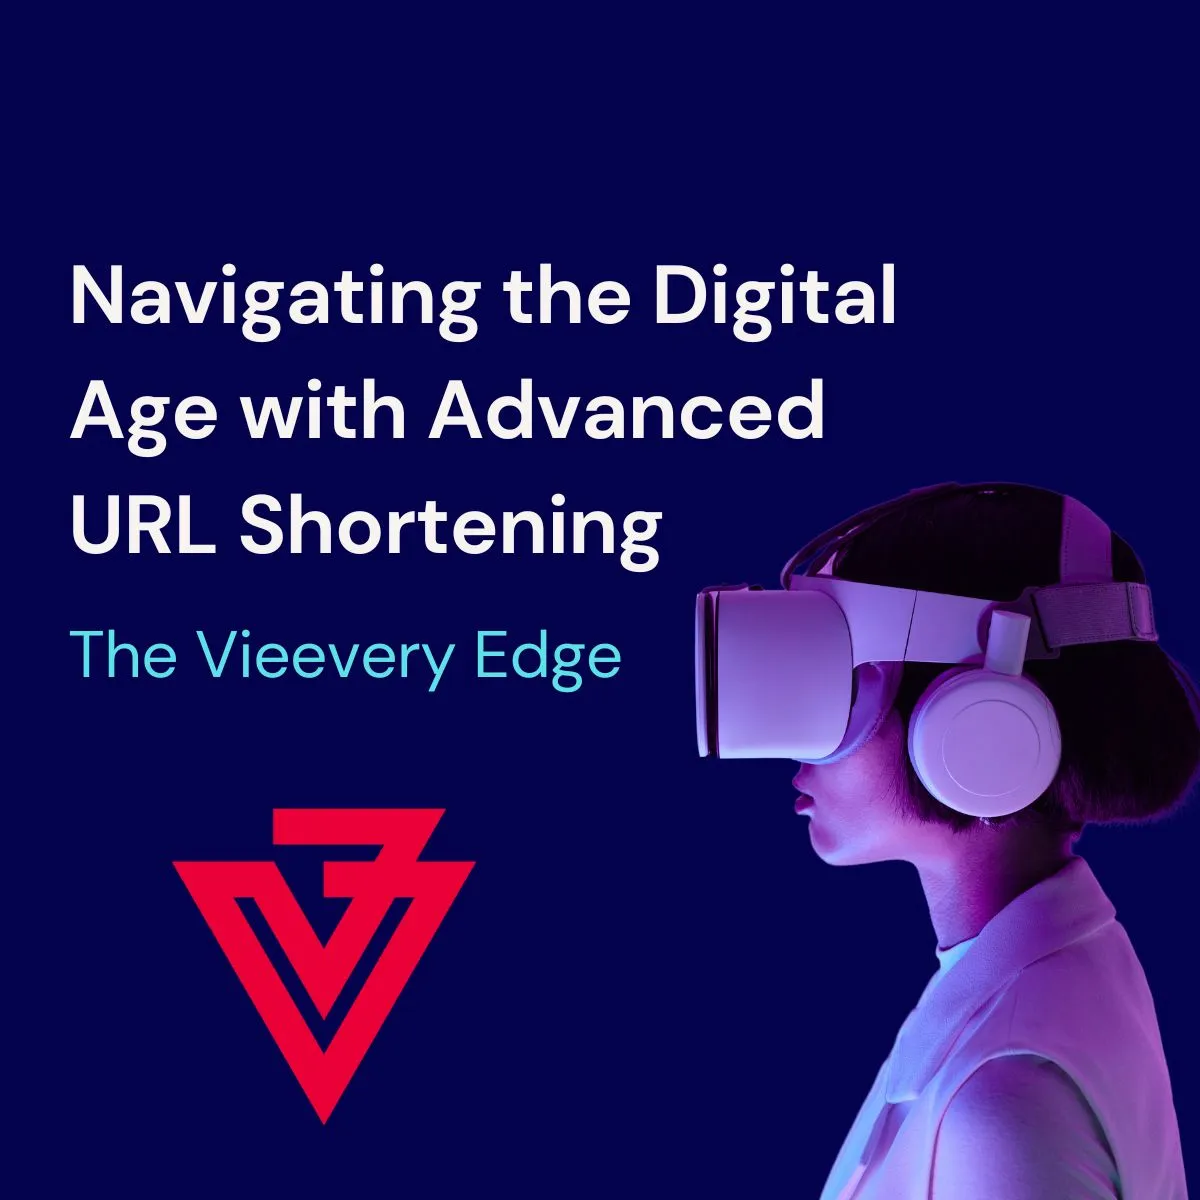 Navigating the Digital Age with Advanced URL Shortening: The Vieevery Edge